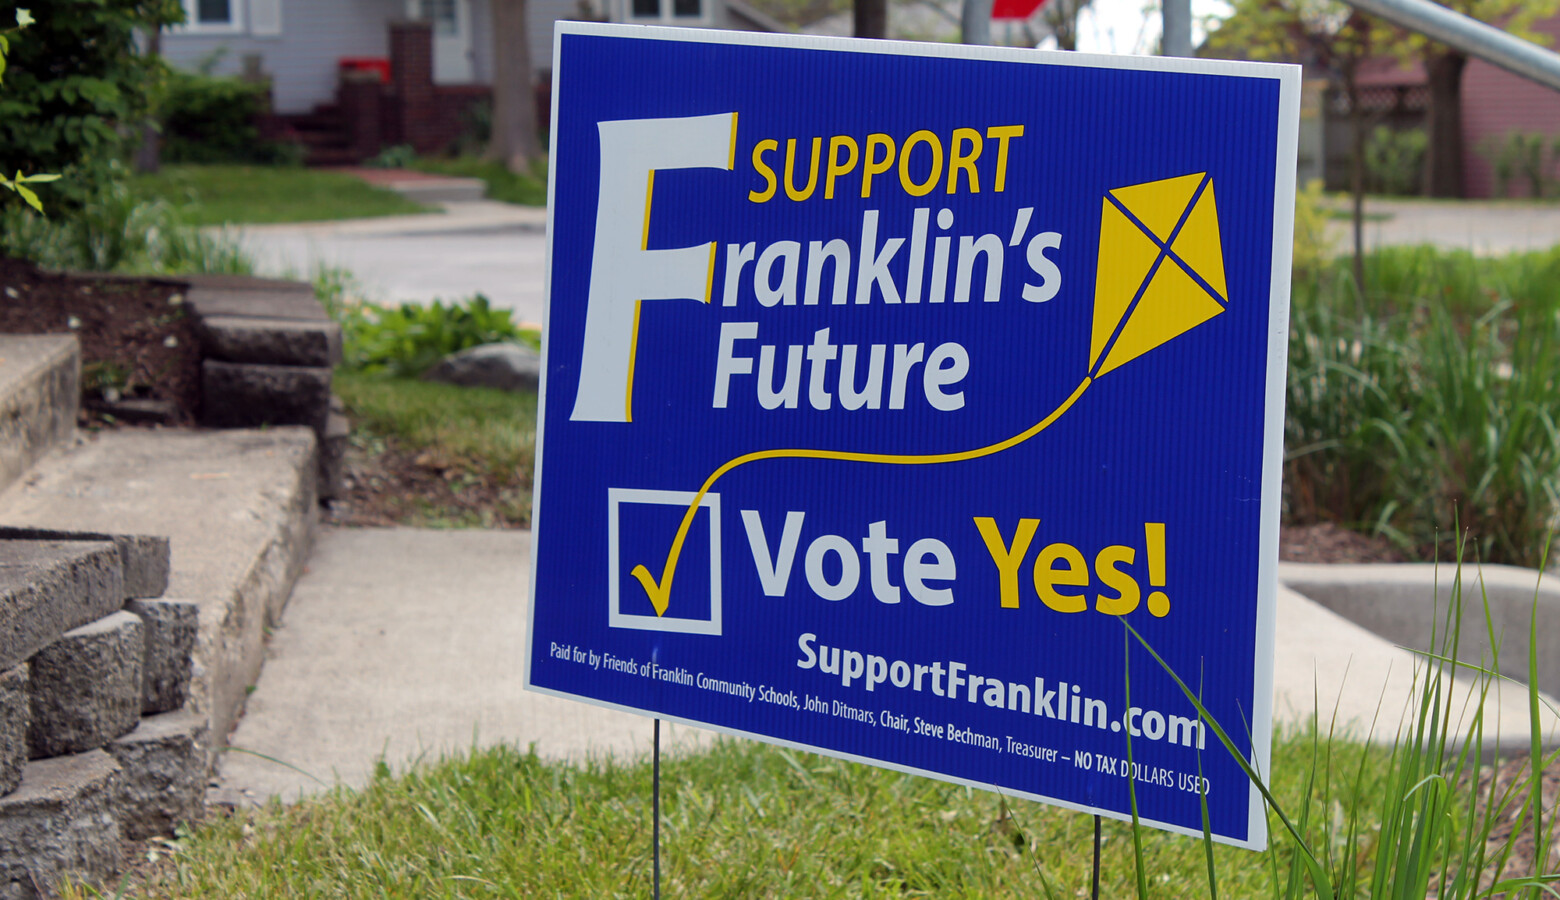 Franklin Community Schools asked voters to approve a referendum for the first time last year during a primary election. If the current language in HB 1222 remains, referenda would be limited to general elections. (Lauren Chapman/IPB News)